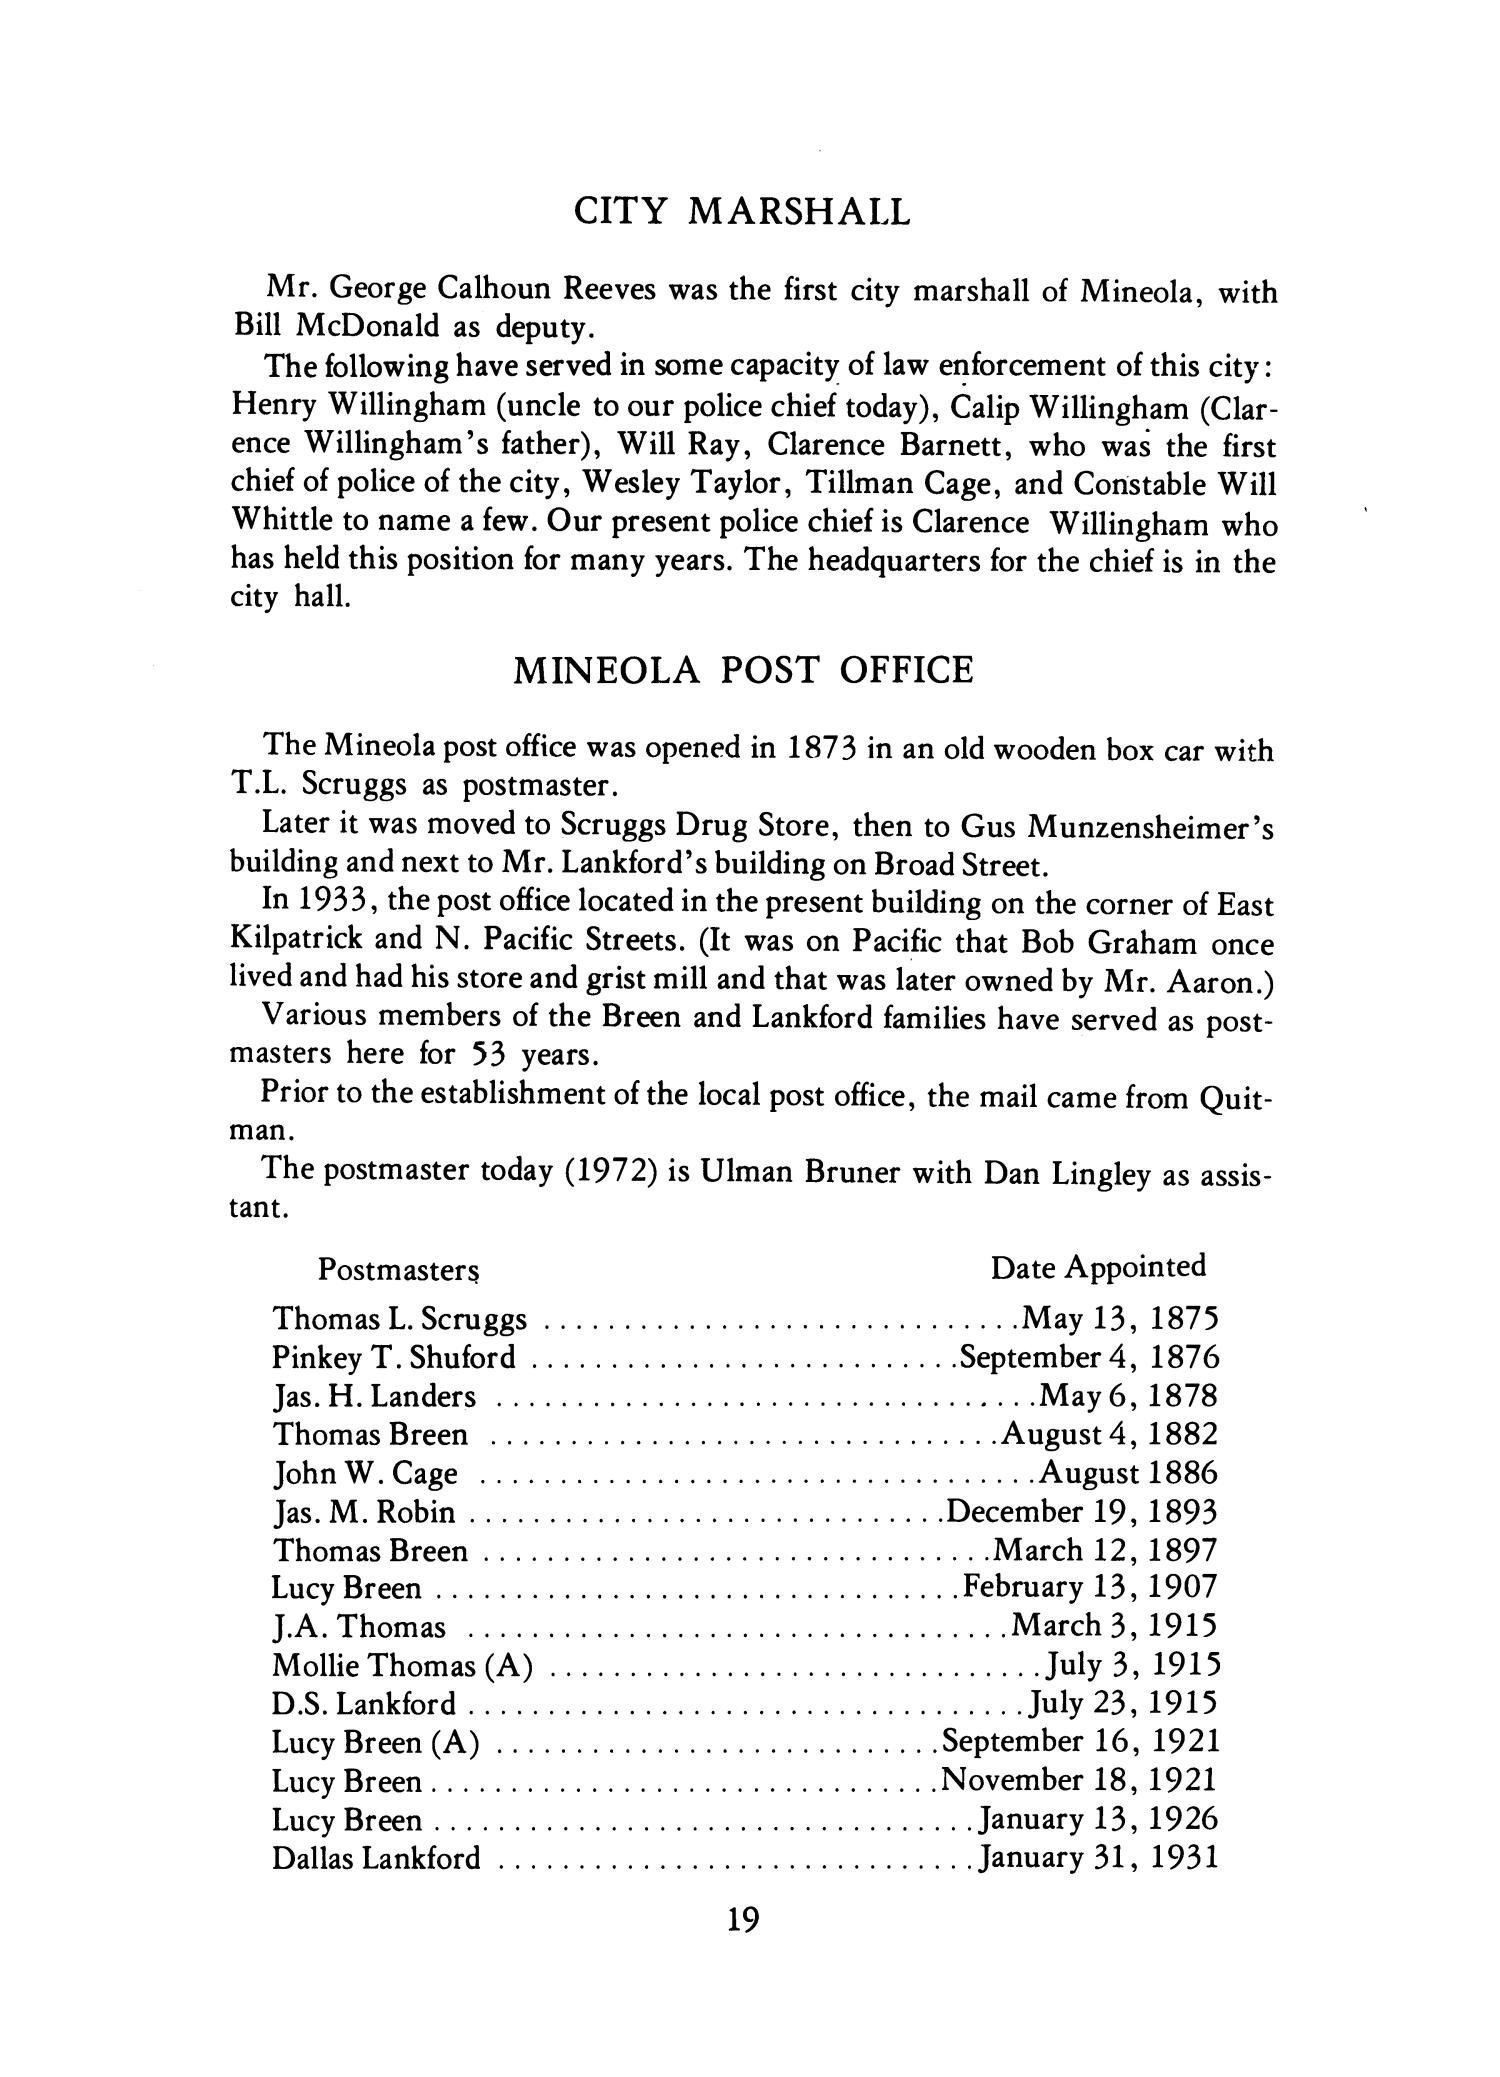 History of Mineola, Texas; "Gateway to the Pines"
                                                
                                                    19
                                                